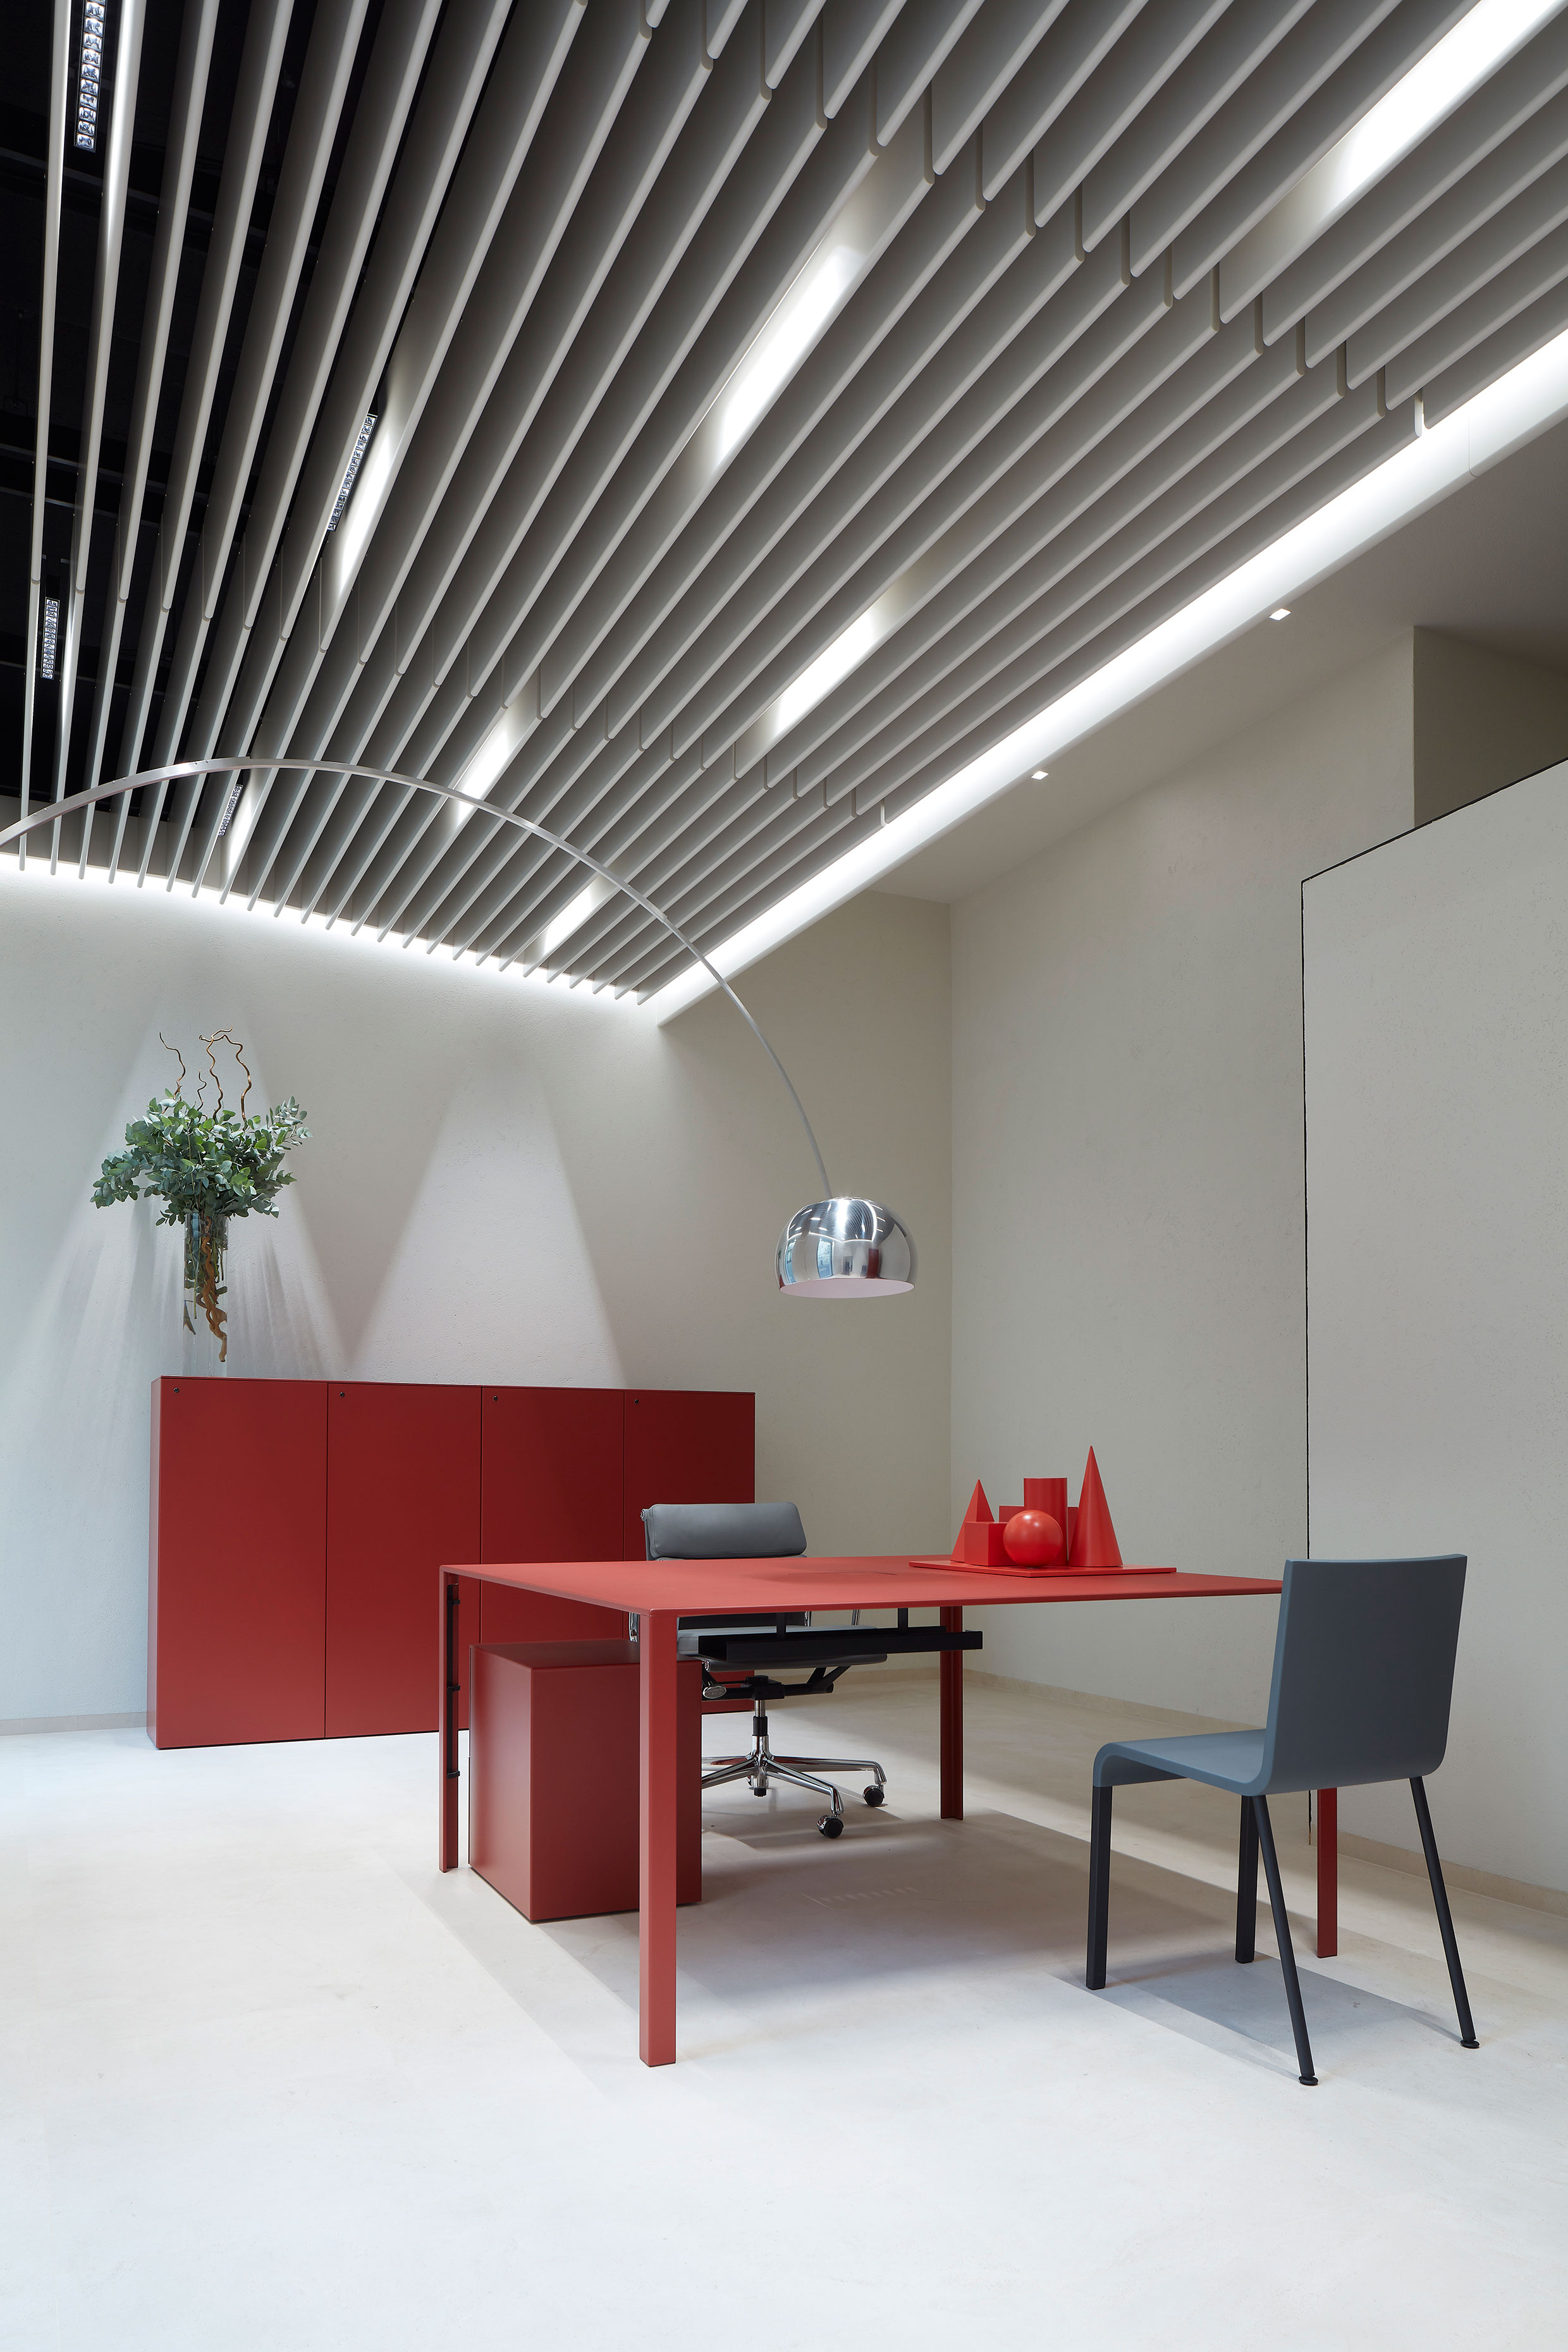 Design office with red table